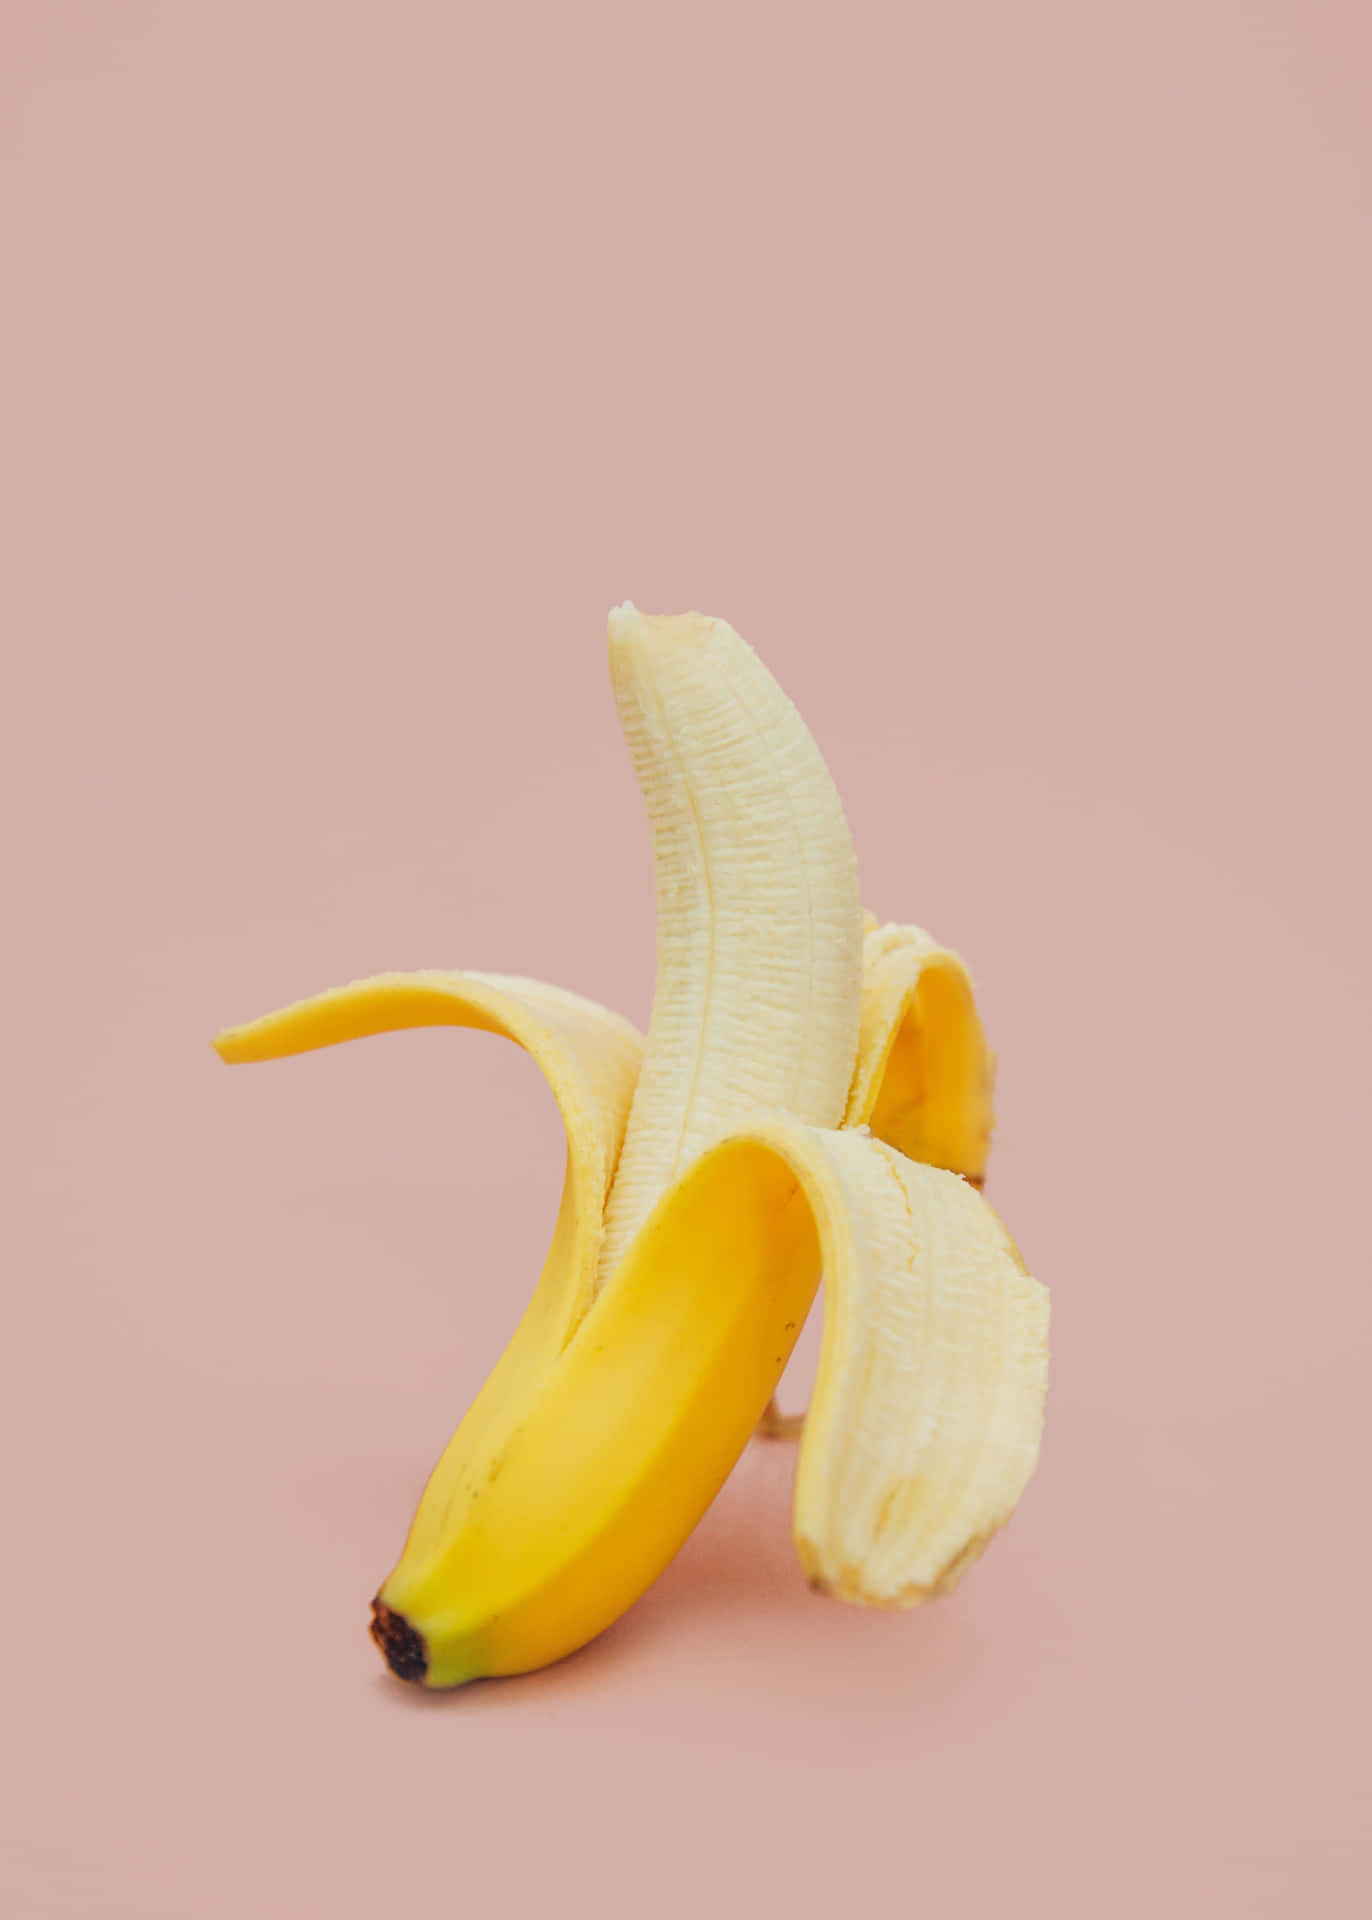 A delicious yellow banana on a white plate.